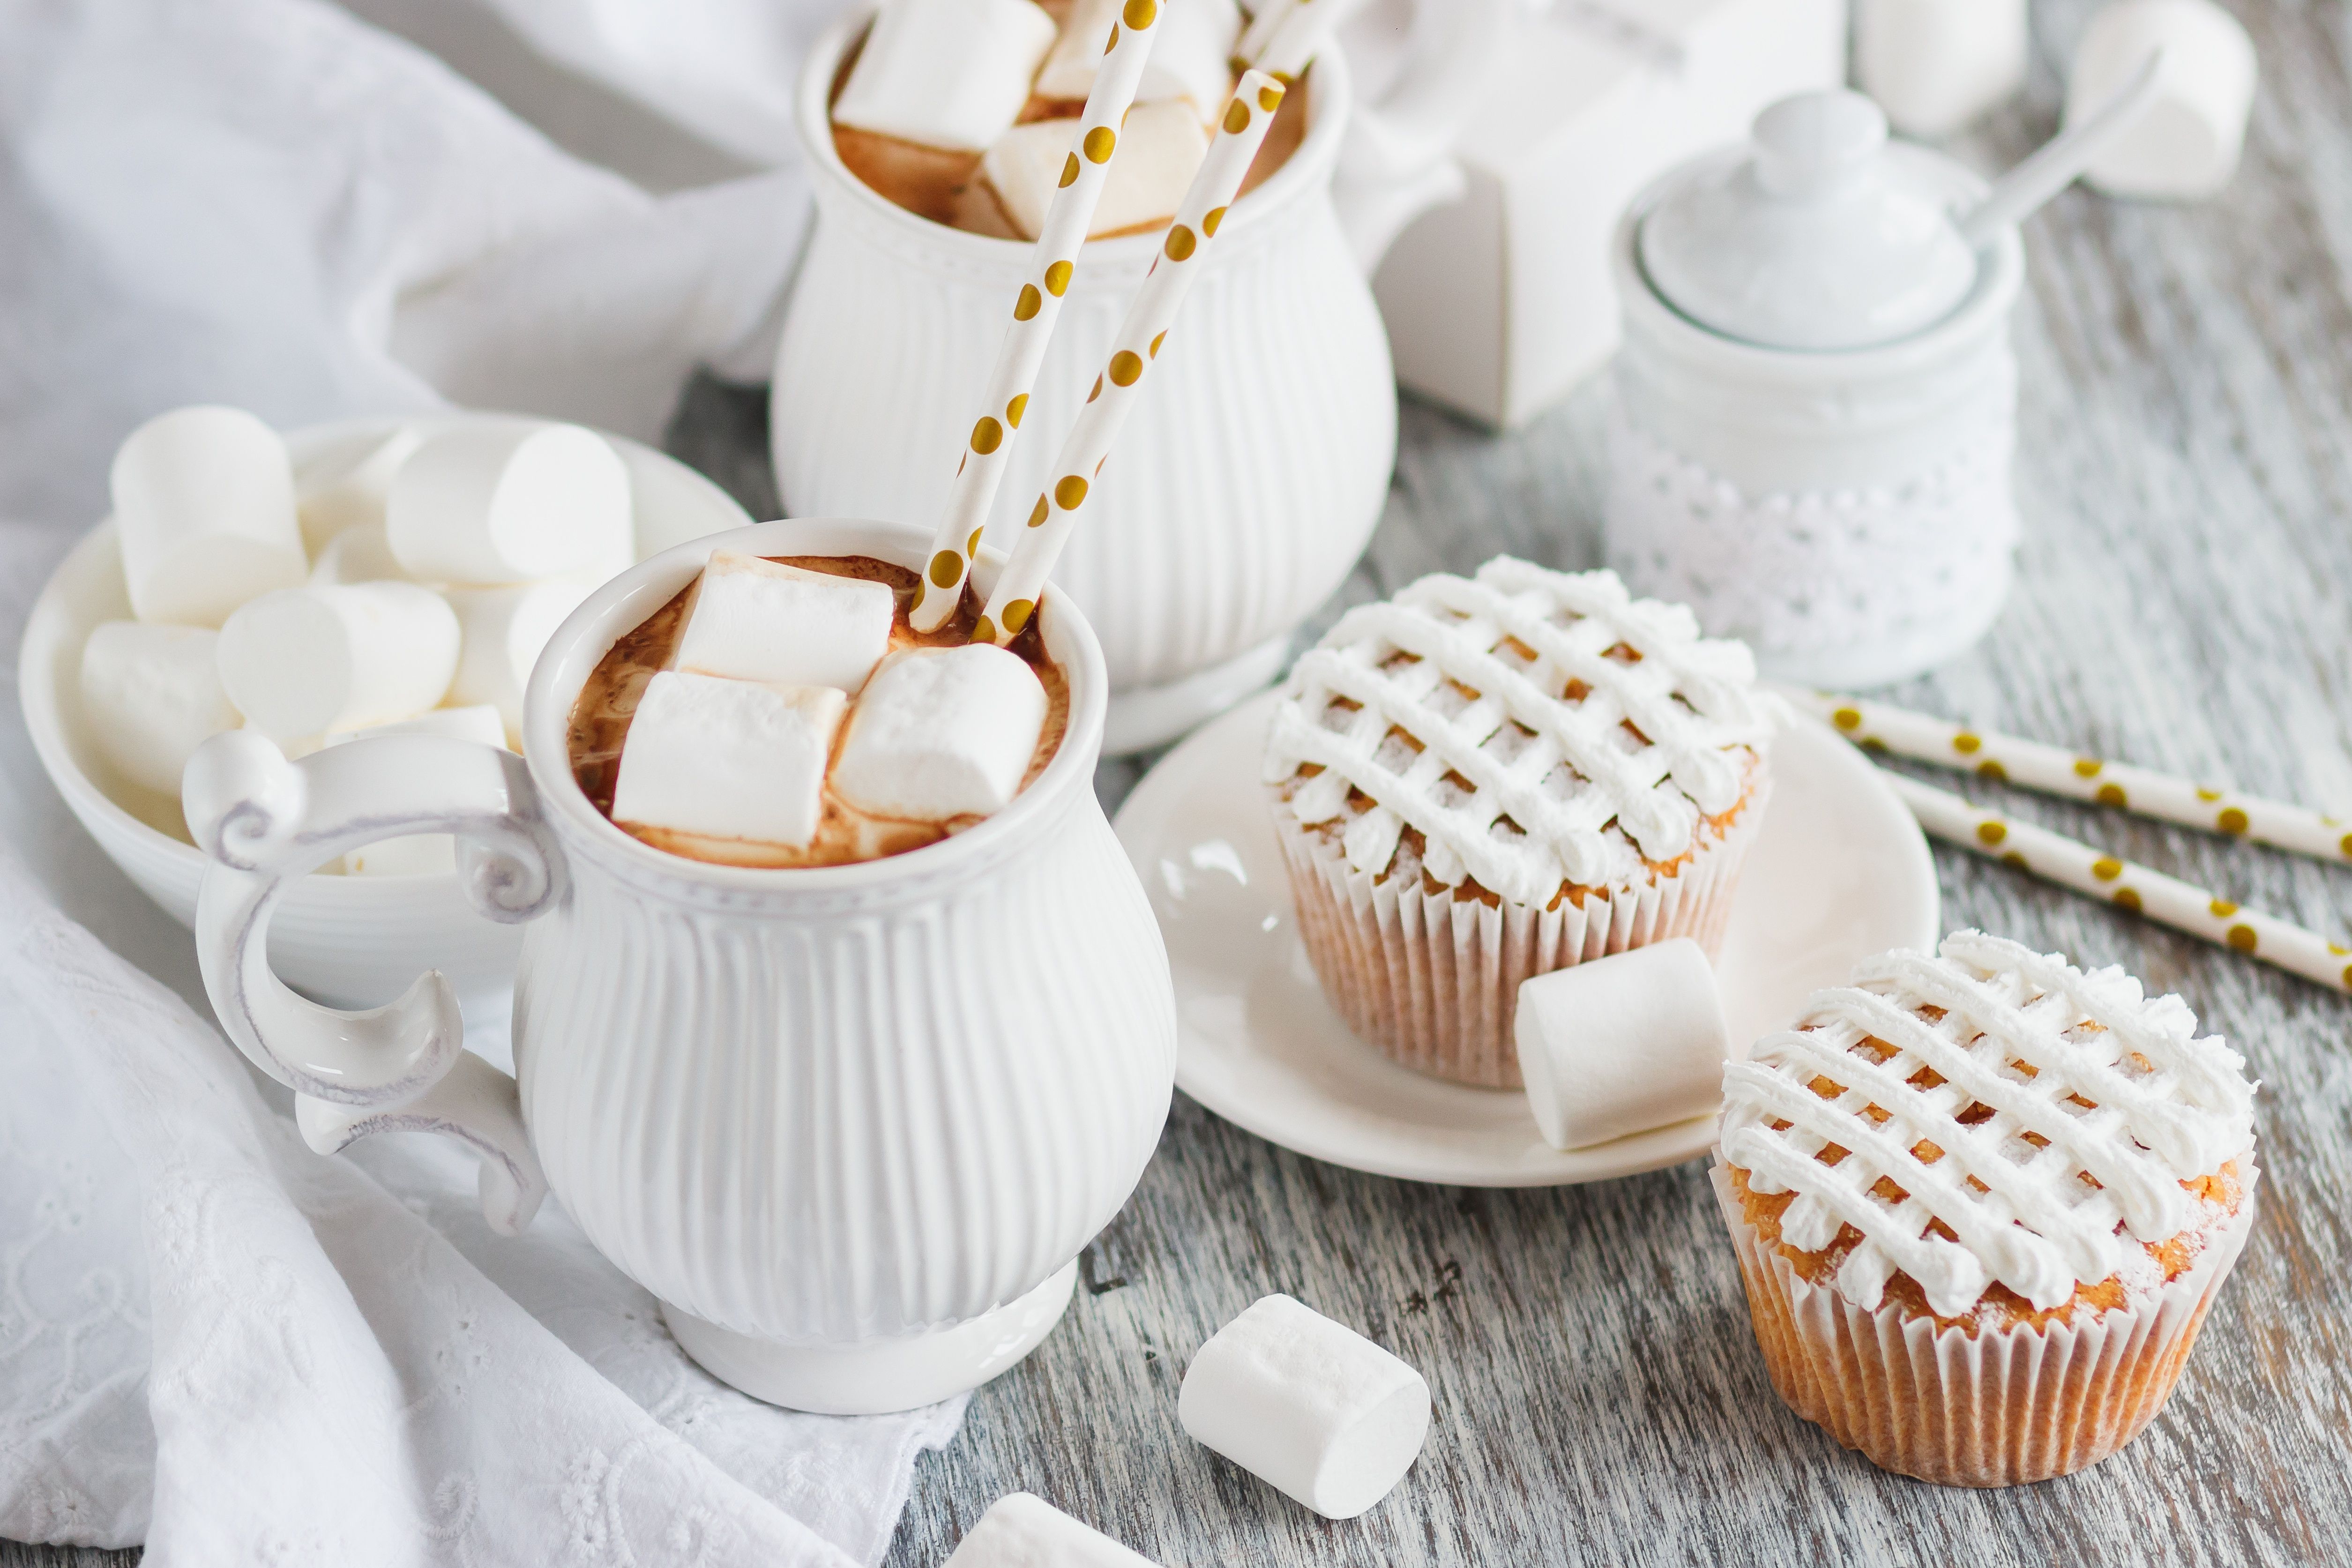 A cup of hot chocolate with marshmallows and two cupcakes - Marshmallows